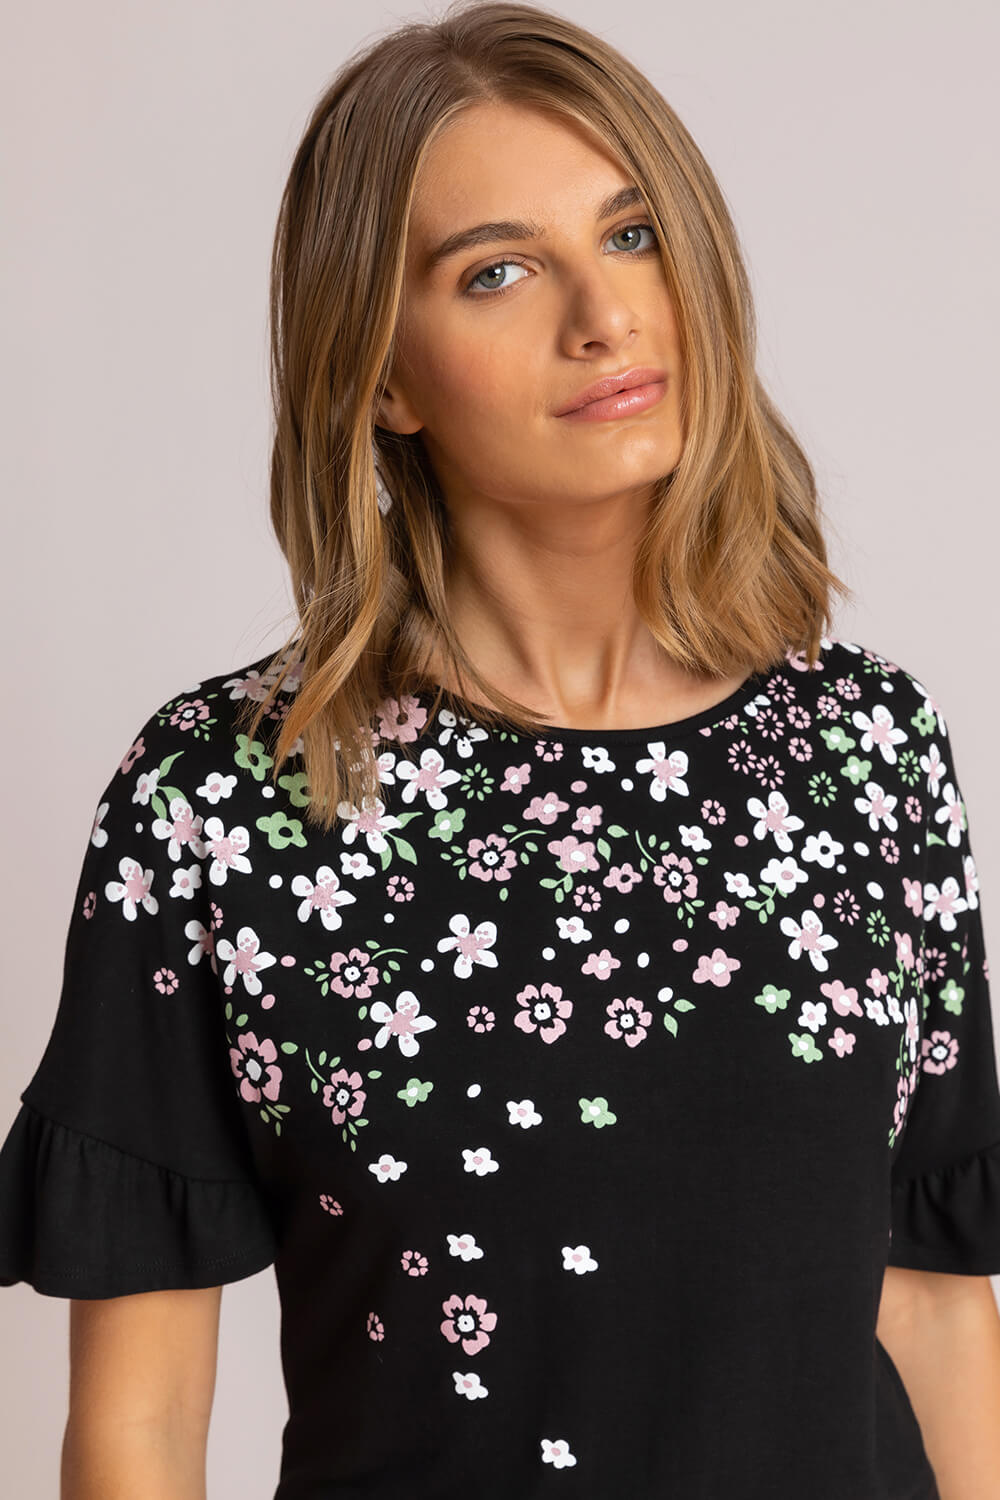 Black Floral Print Frill Sleeve Top, Image 4 of 5